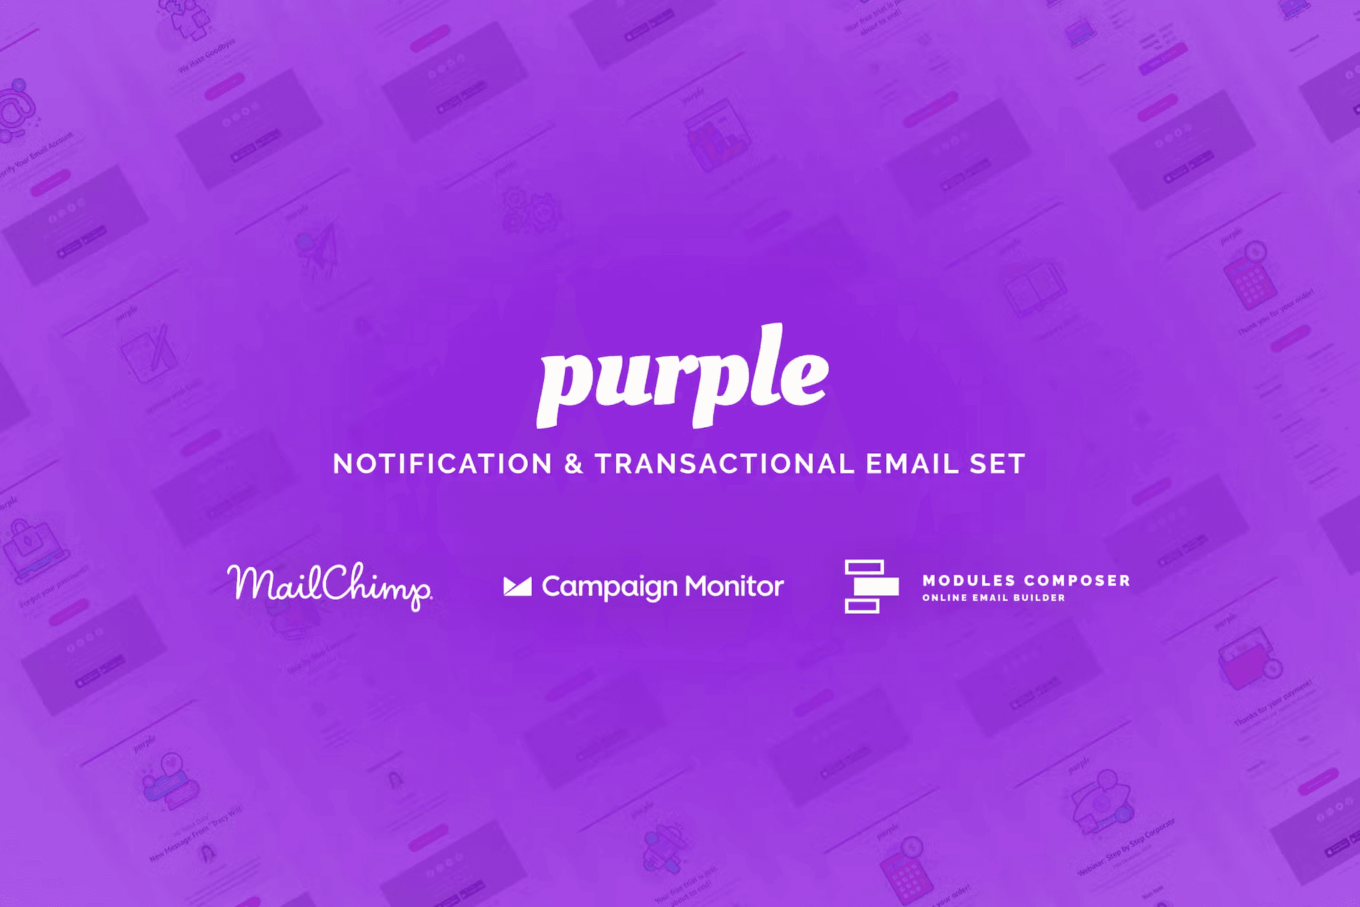 Purple - Notification Email Templates by Psd2Newsletters